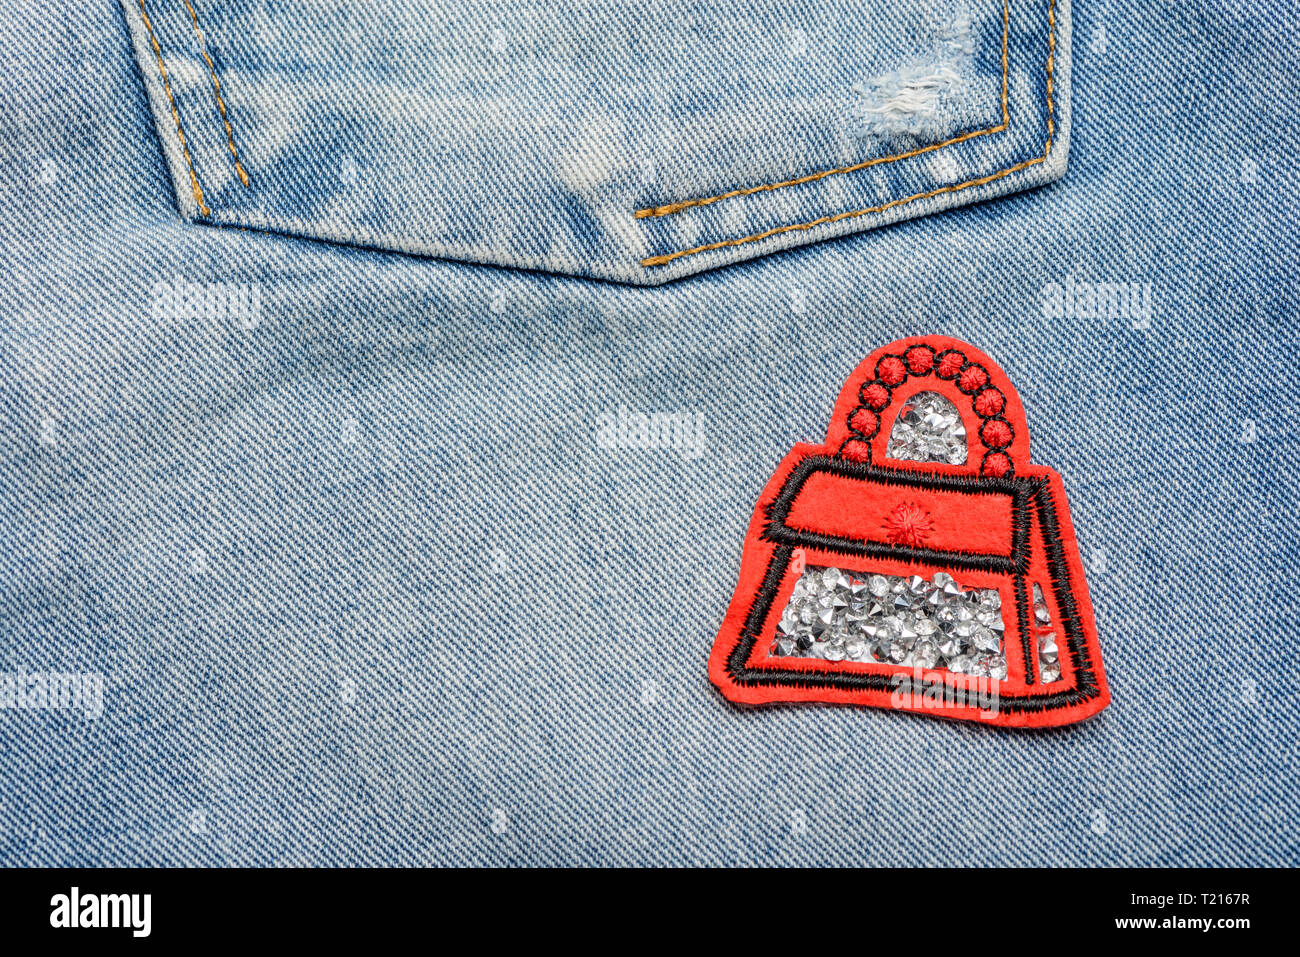 Red bag patch with rhinestones. Stock Photo